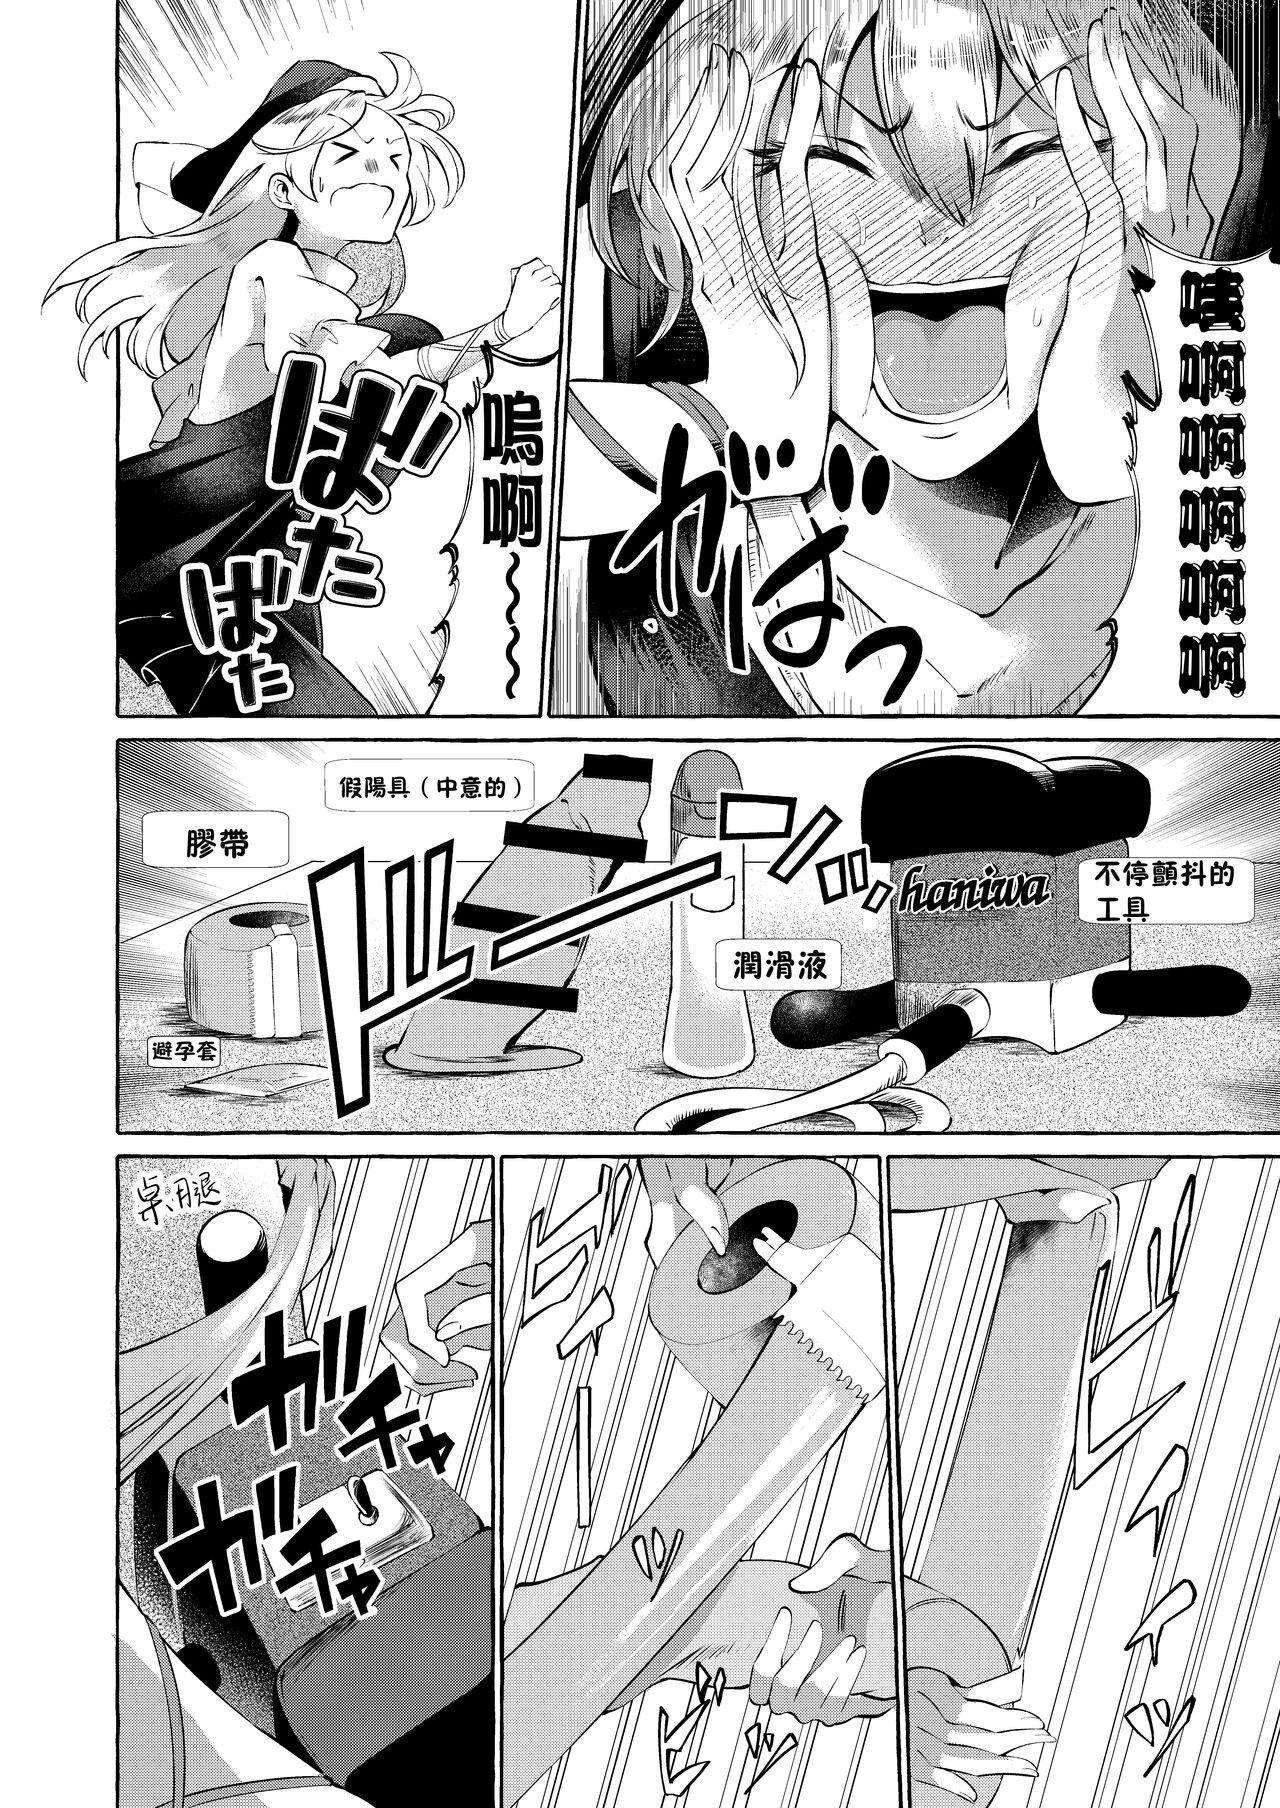 Brother 妄想に肢体を委ねて - Touhou project Real Amature Porn - Page 5